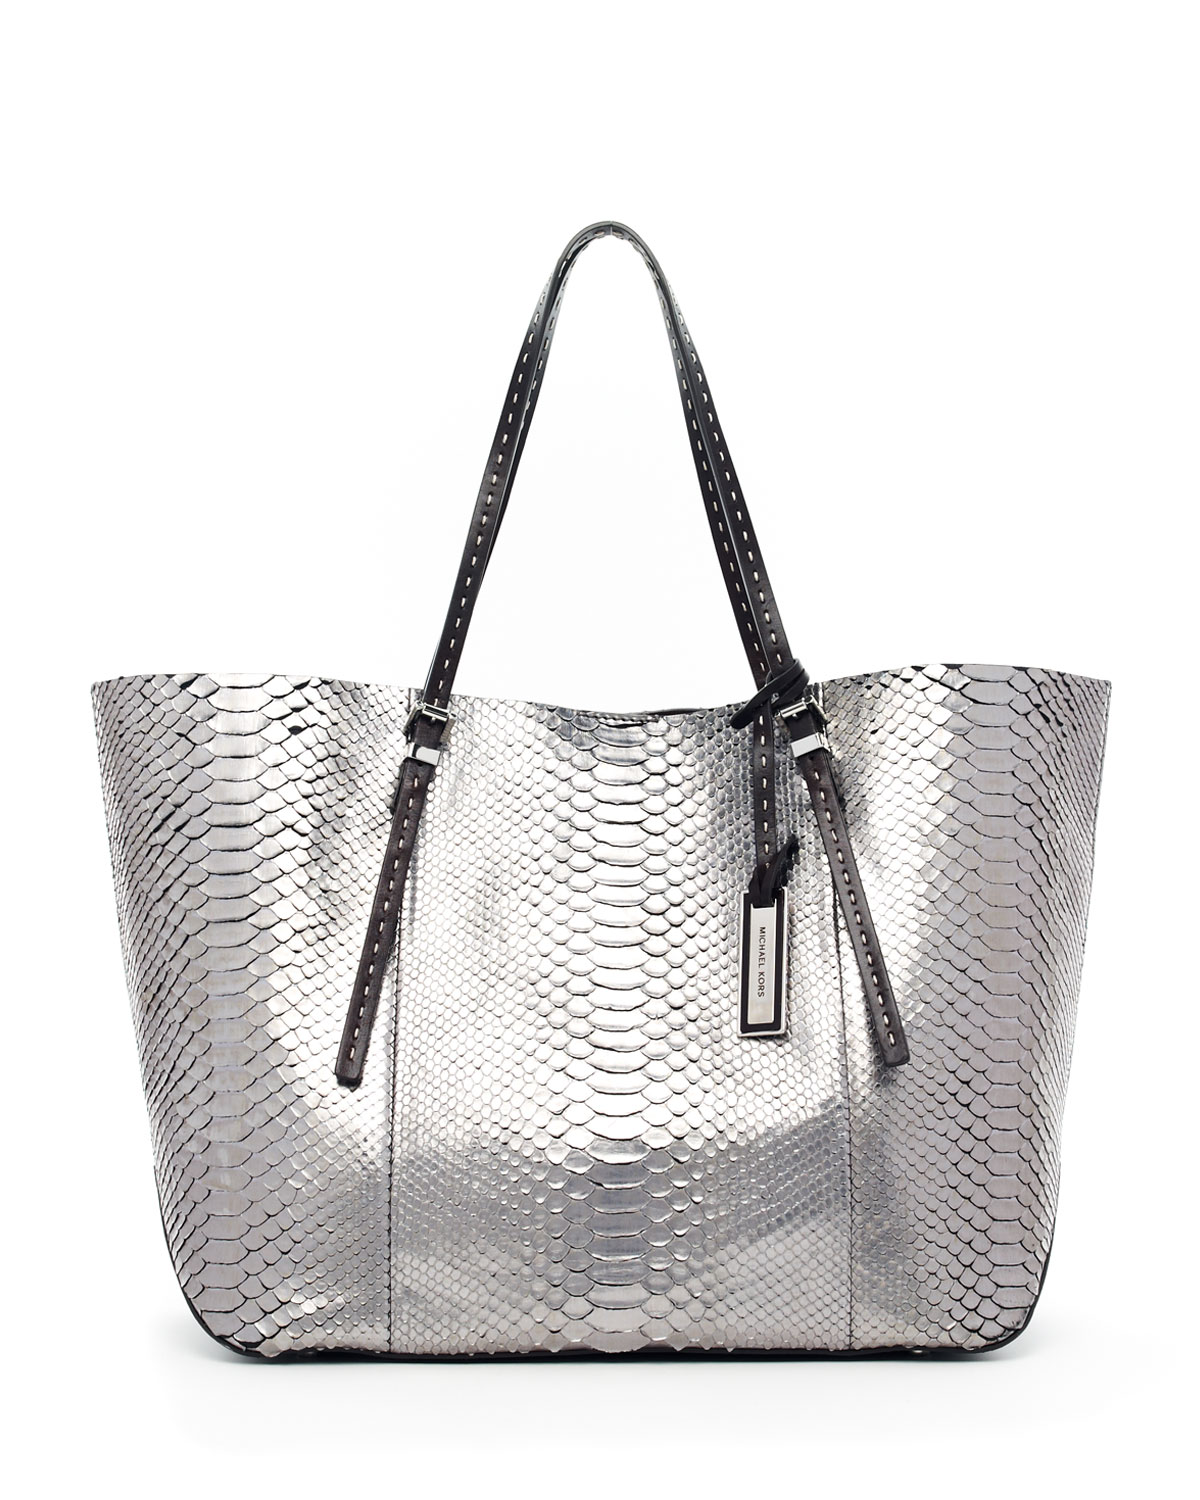 Michael Kors Gia Python Tote in Silver 